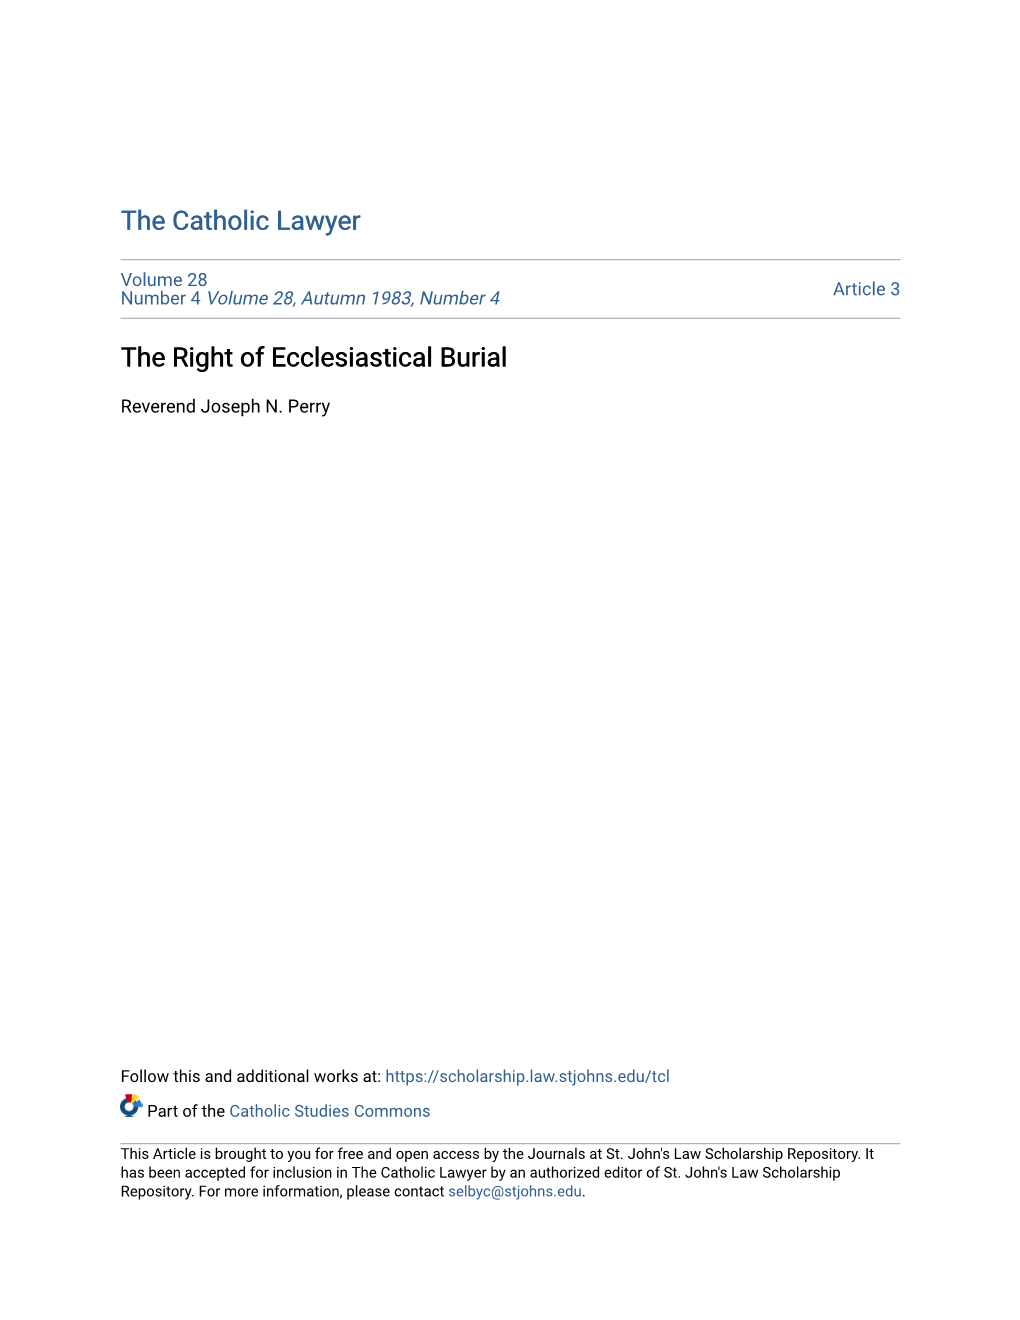 The Right of Ecclesiastical Burial